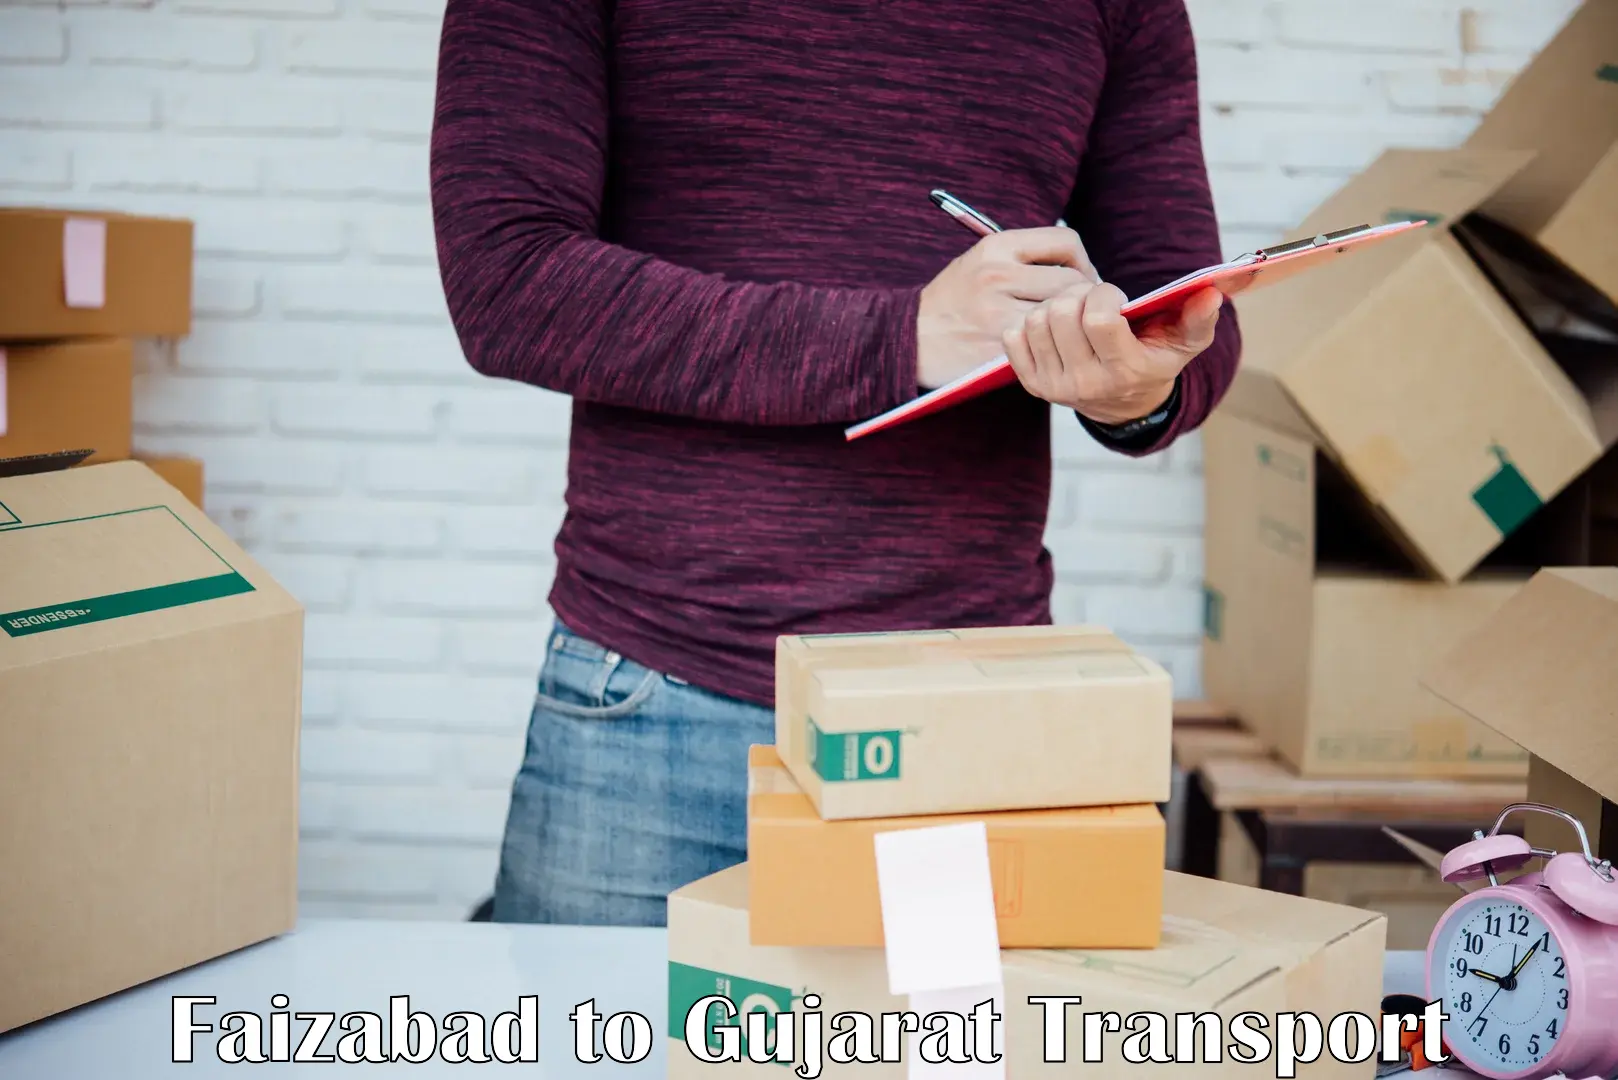 Cargo transport services in Faizabad to GIDC